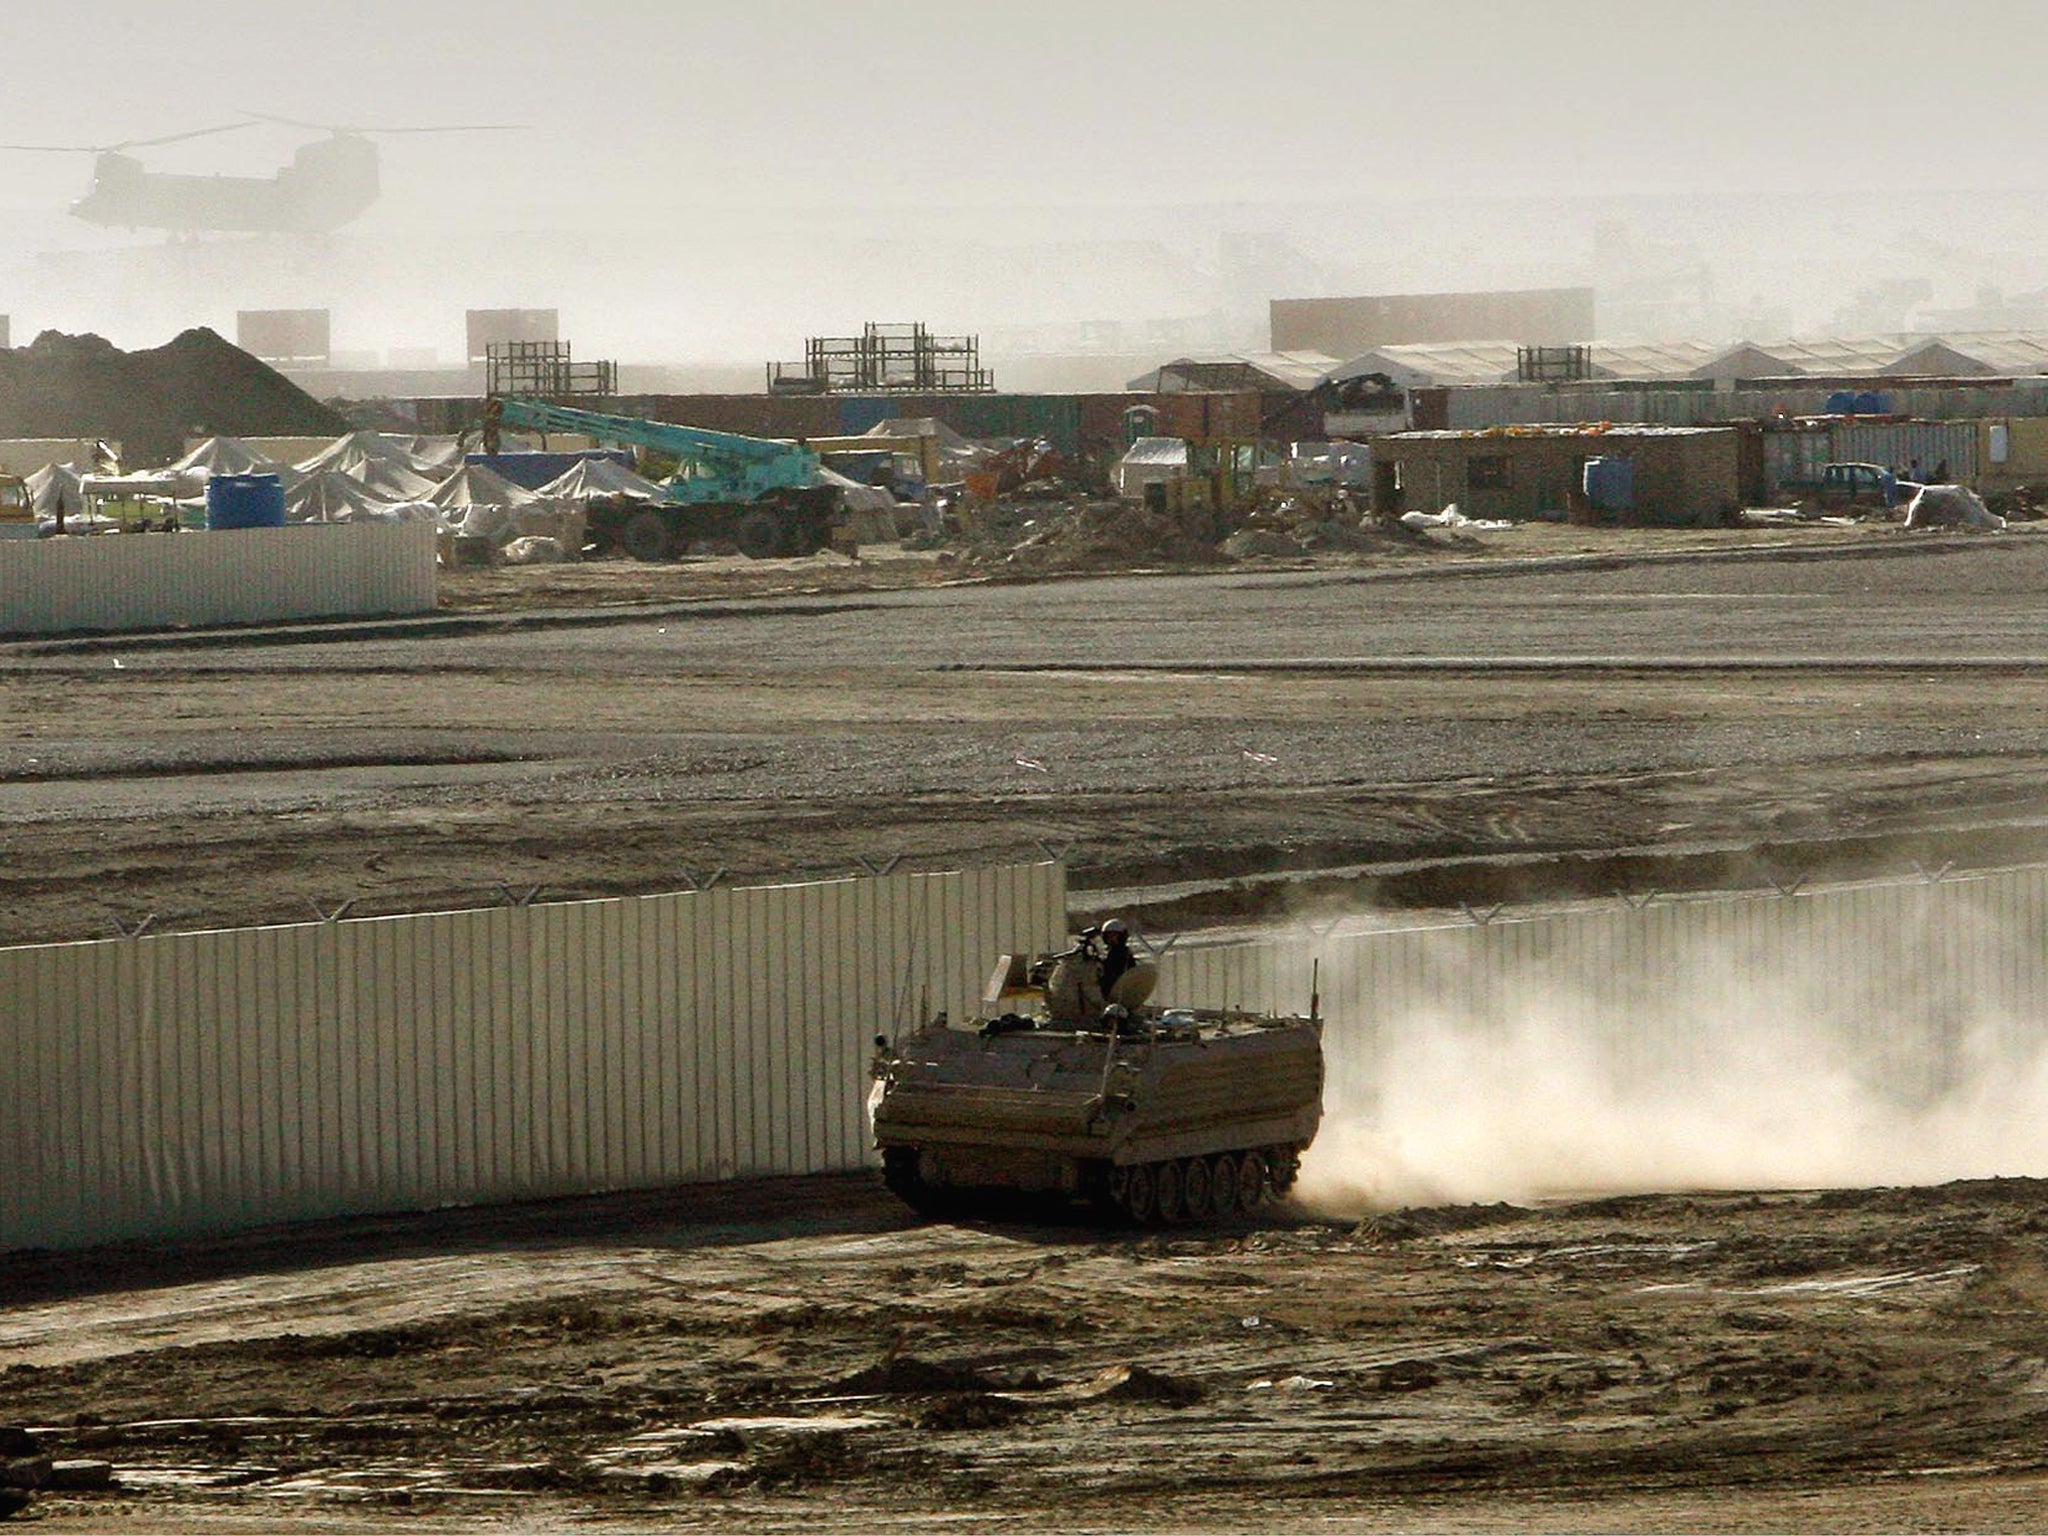 A British armored vehicle patrols on the periphery of the camp Bastion in southern Afghanistan in 2007